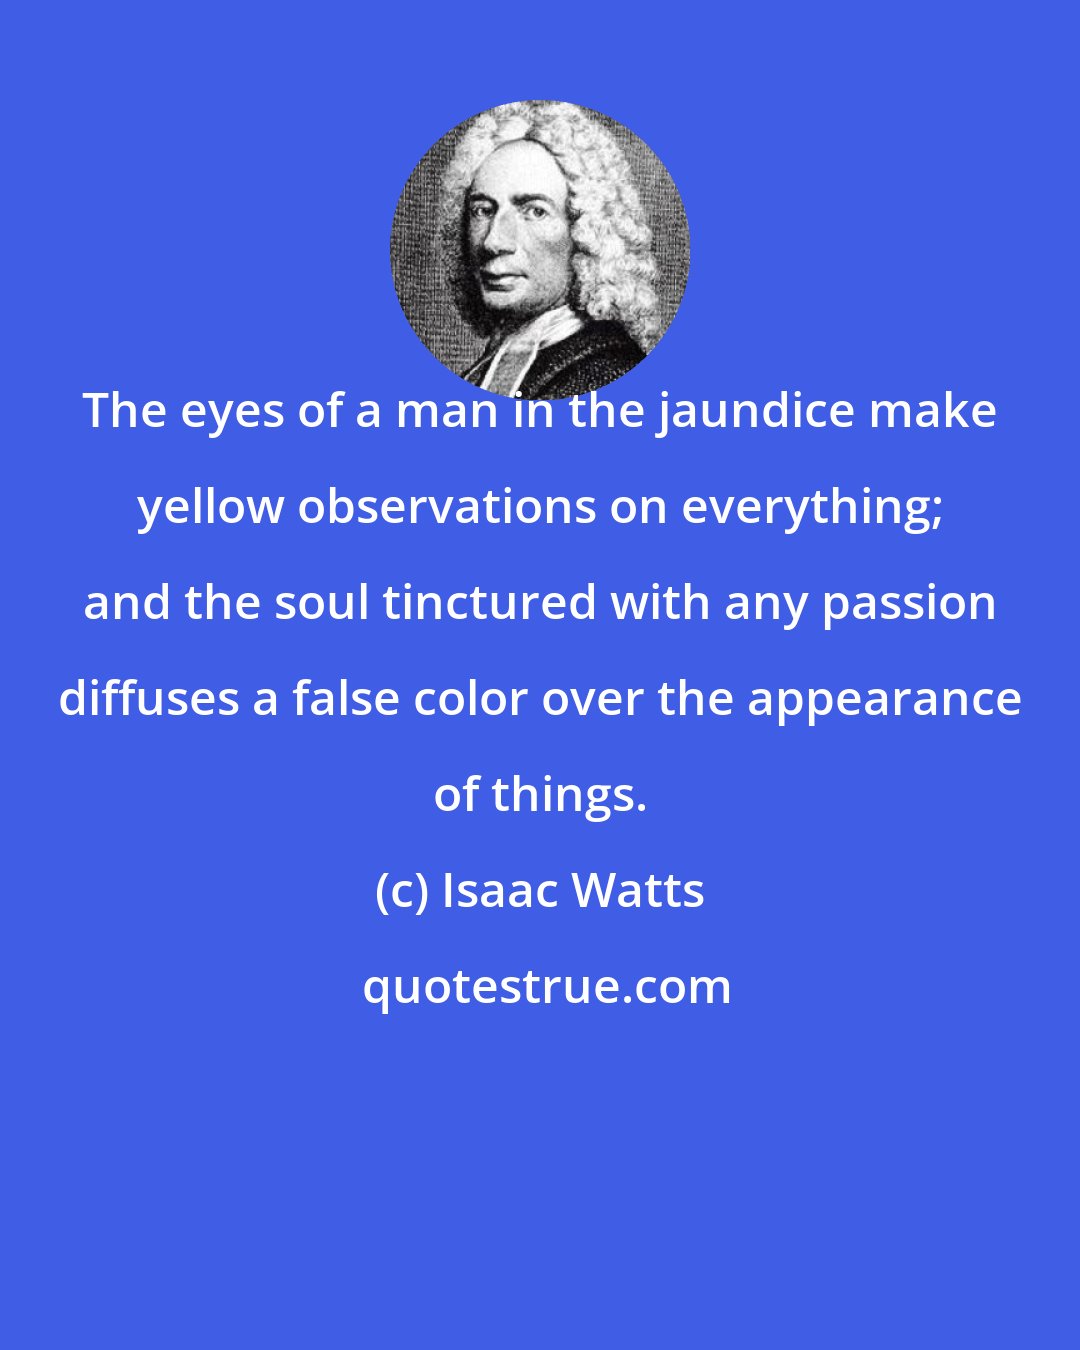 Isaac Watts: The eyes of a man in the jaundice make yellow observations on everything; and the soul tinctured with any passion diffuses a false color over the appearance of things.